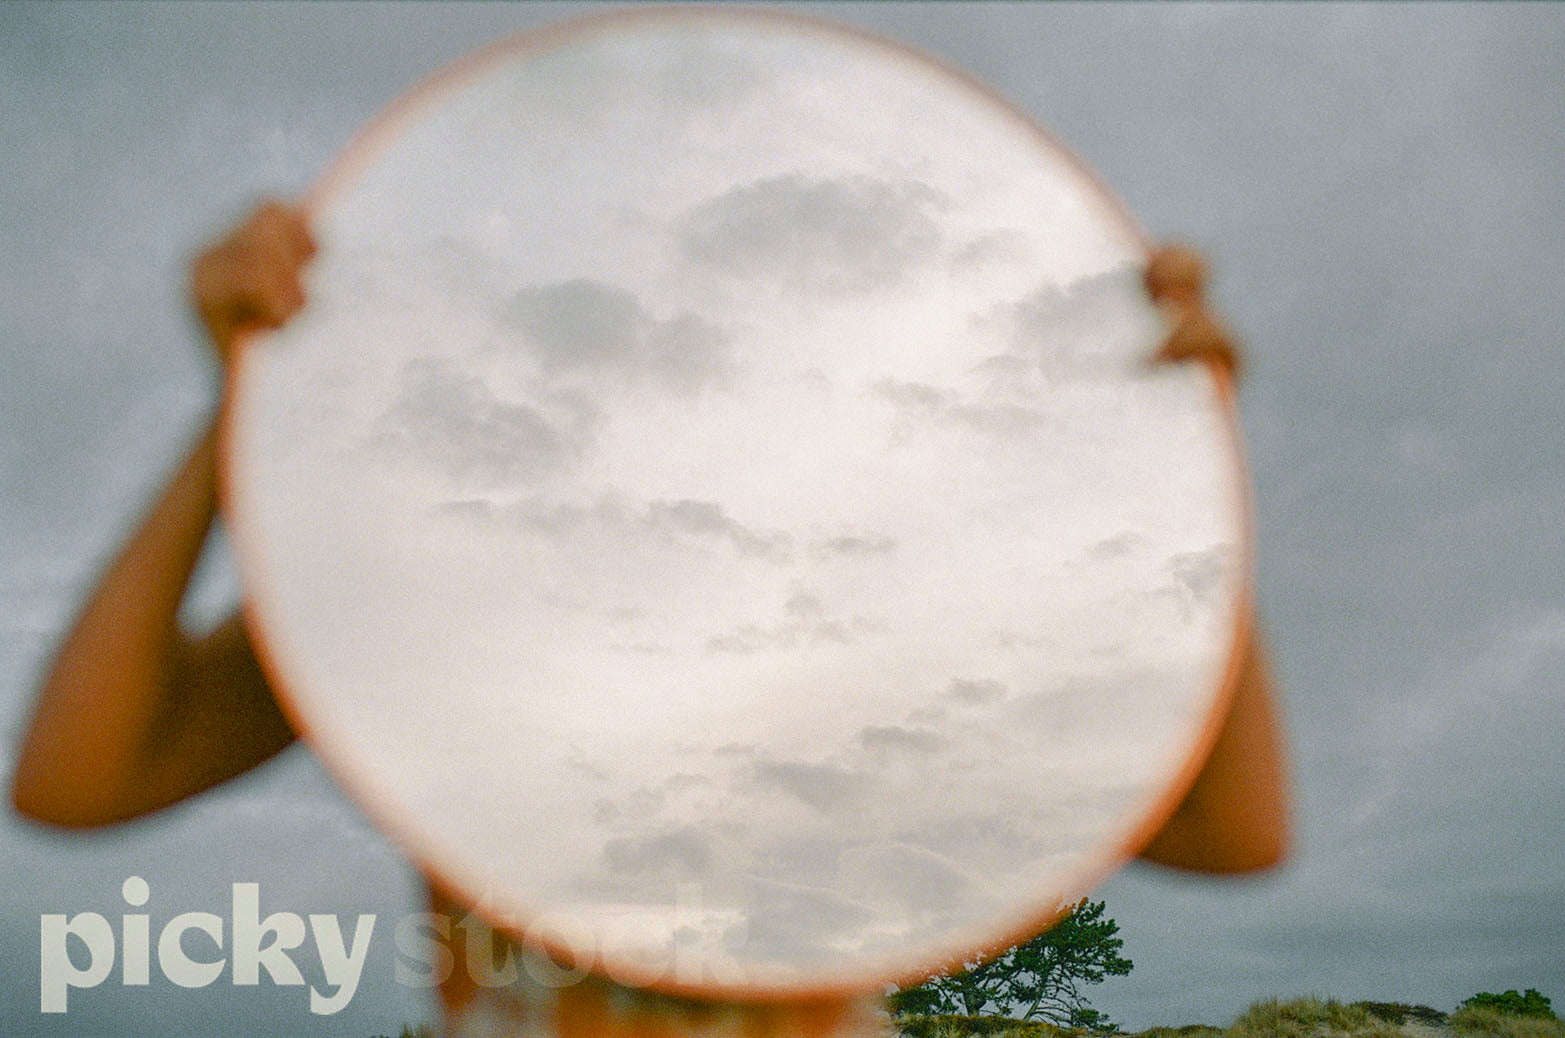 Lady holding a large round mirror towards the sky. Mirror is reflecting a soft white tone, with clouds. Background is a soft evening sky with green trees in the fair background. 